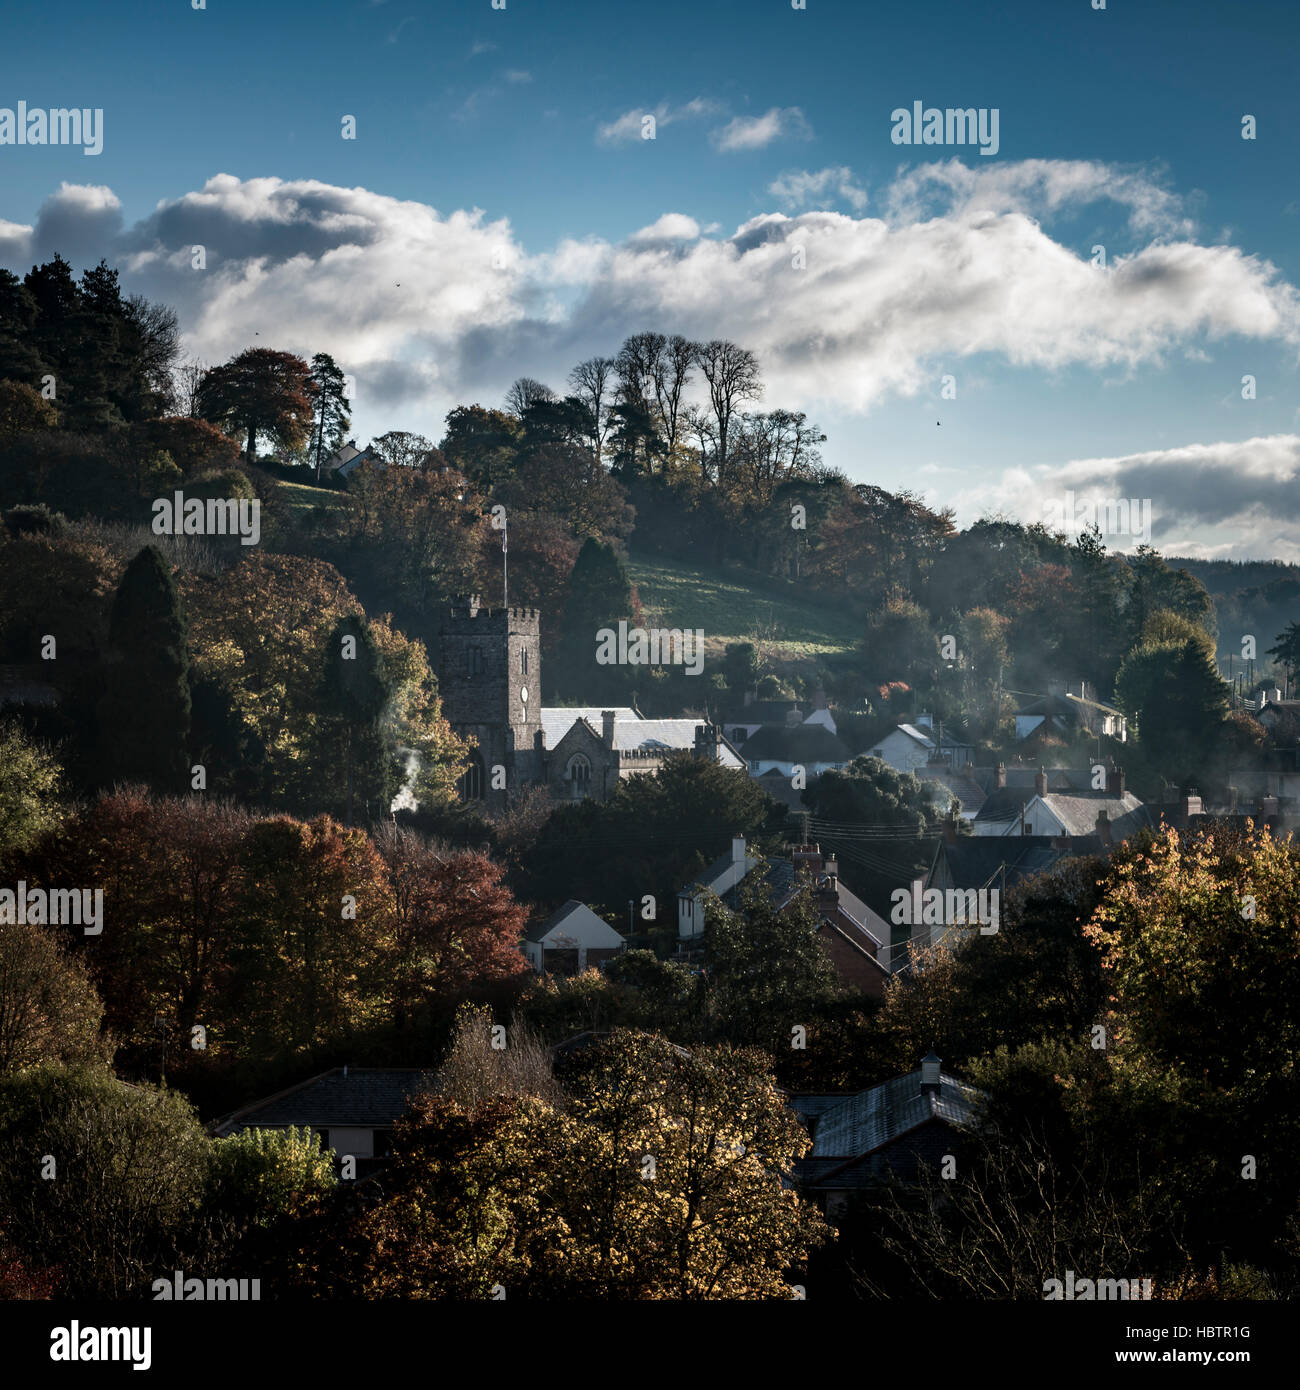 A view across the small rural town of Dulverton, in Exmooor national park, Somerset. Stock Photo